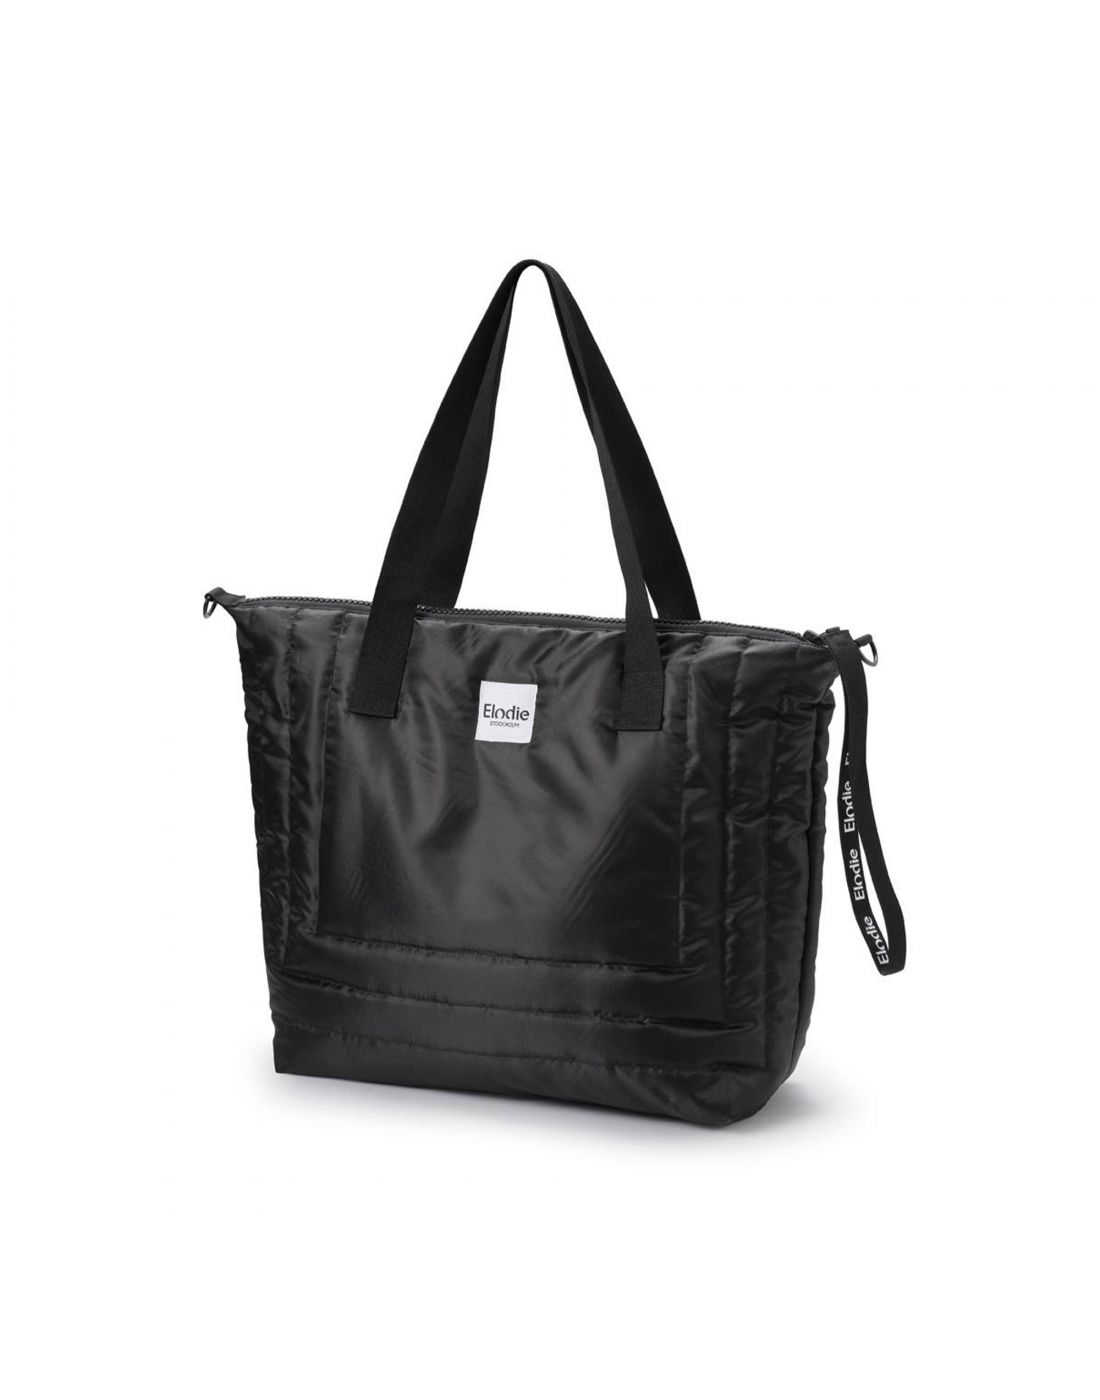 Elodie Changing Bag Quilted Black
